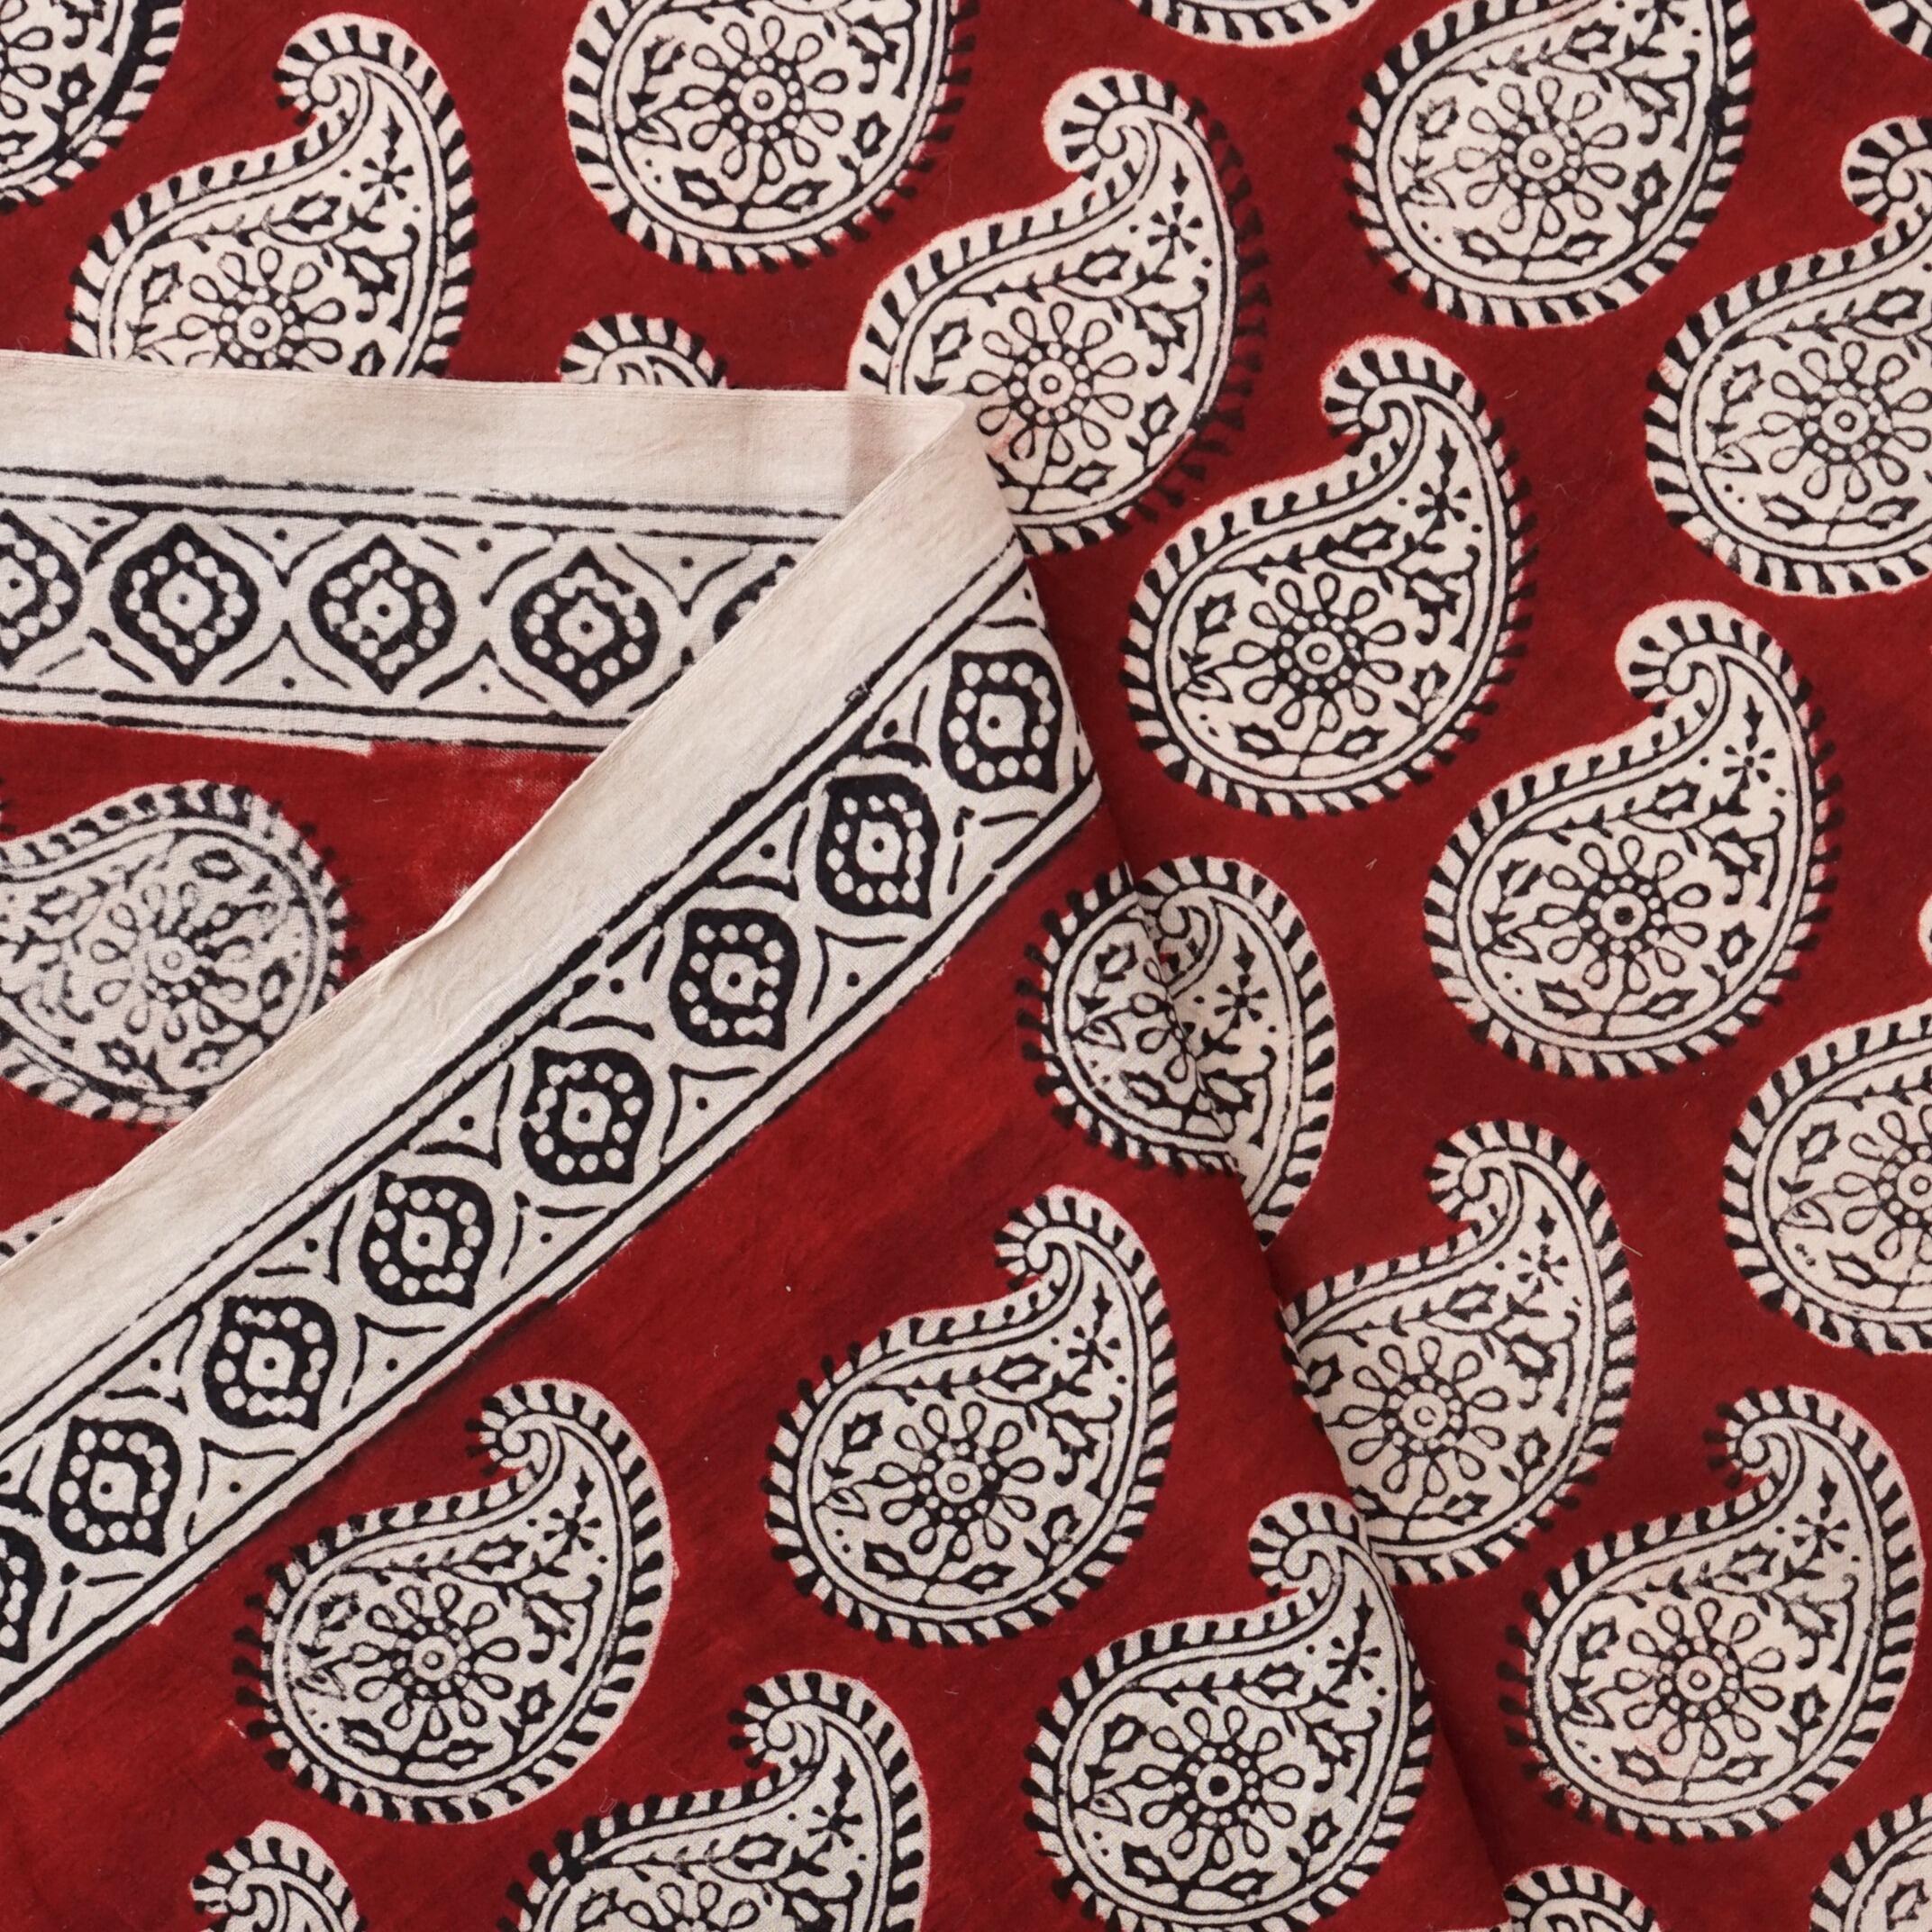 100% Block-Printed Cotton Fabric From India- Bagh - Alizarin Red Paisley Print - Selvedge